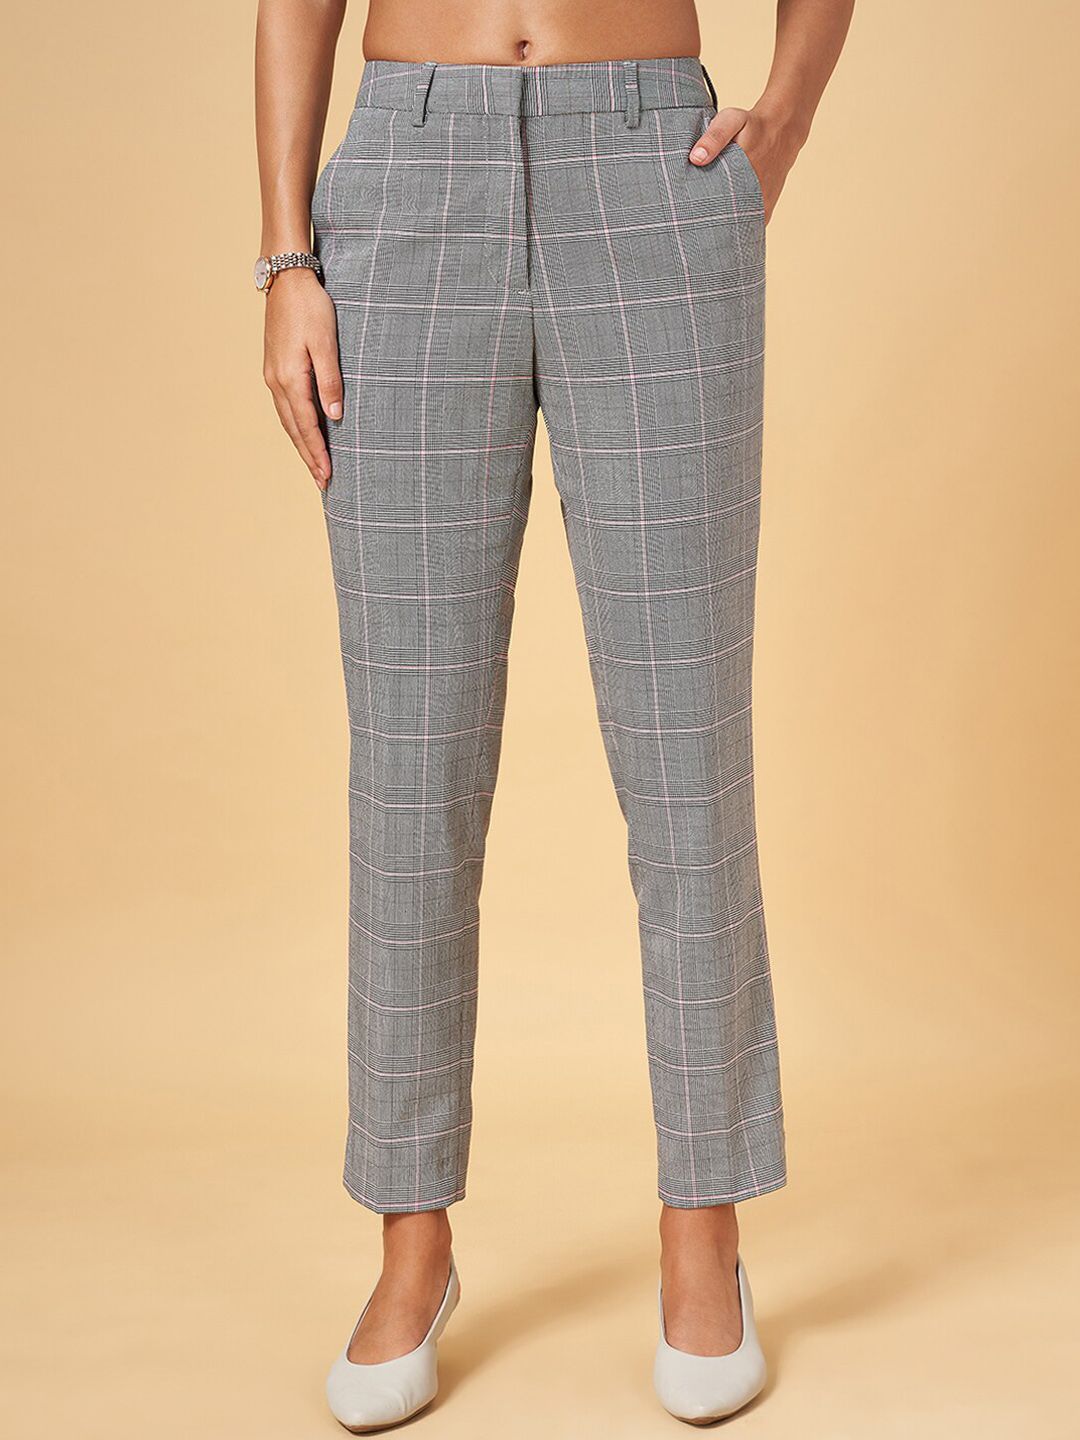 Annabelle by Pantaloons Women Mid Rise Plain Checked Slim Fit Formal Trousers Price in India